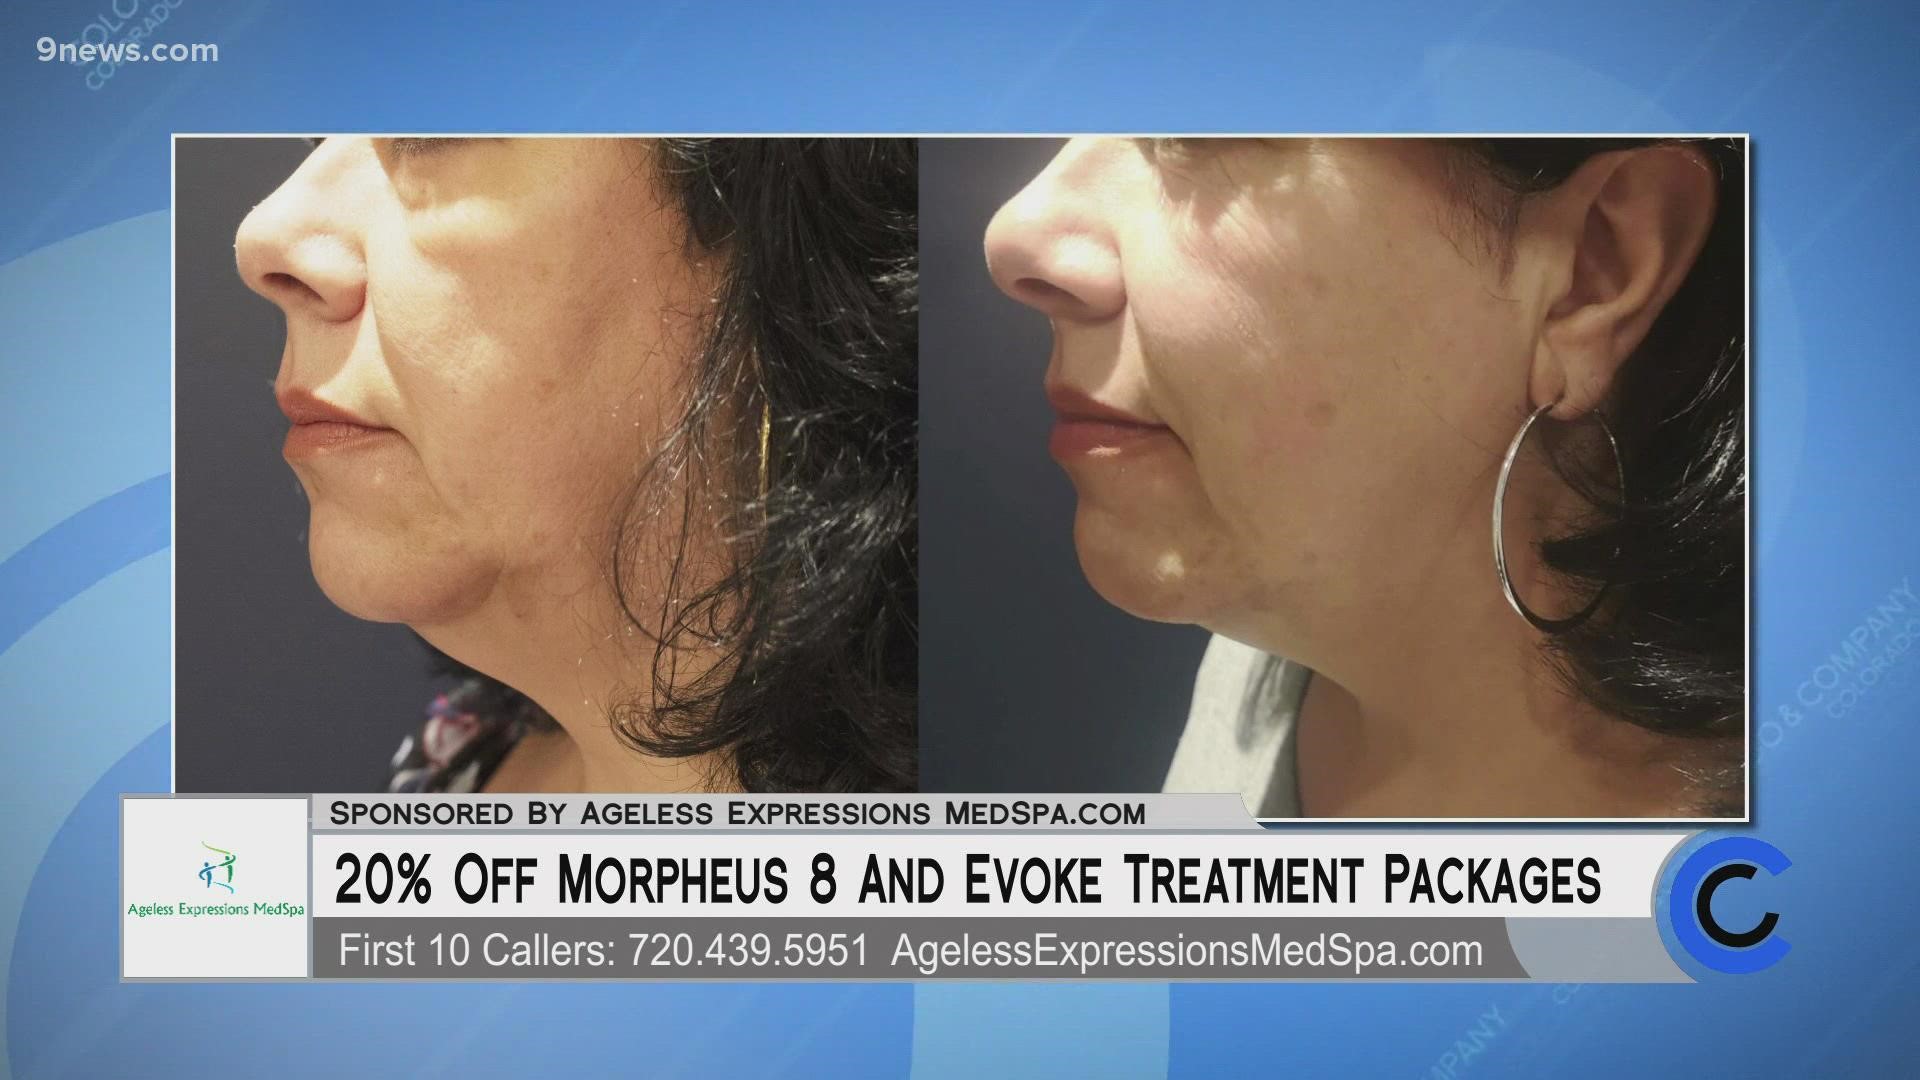 Ageless Expressions has 20% off for the first 10 callers to book a Morpheus 8 treatment! Call 720.439.5951 or visit AgelessExpressionsMedSpa.com. **PAID CONTENT**